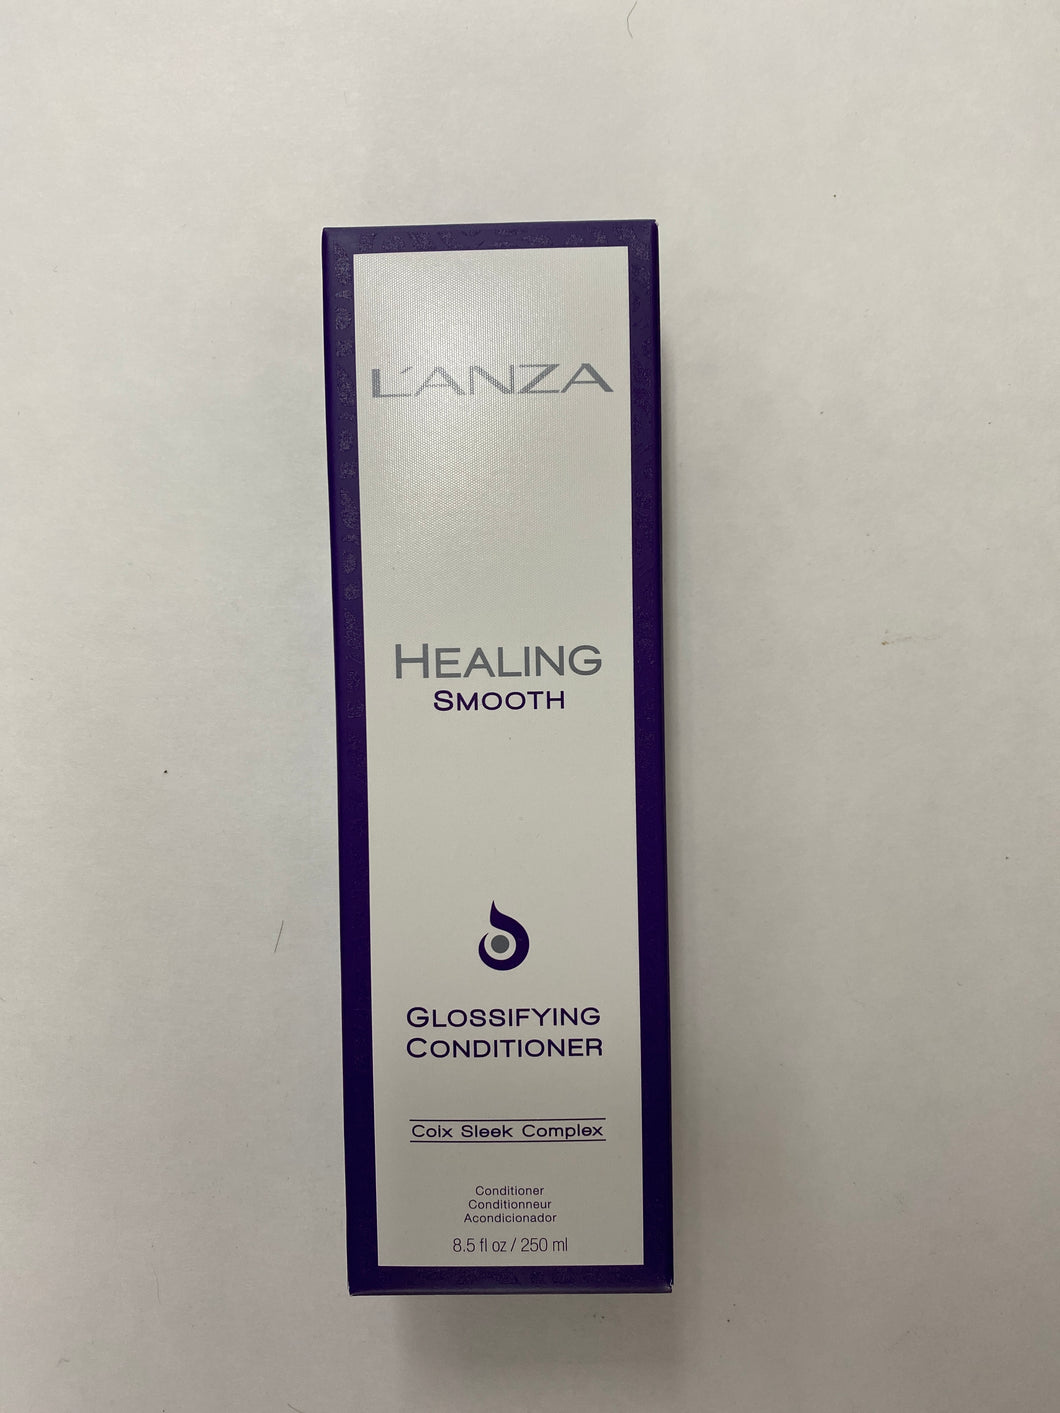 L’anza Healing Smooth Glossifying Conditioner